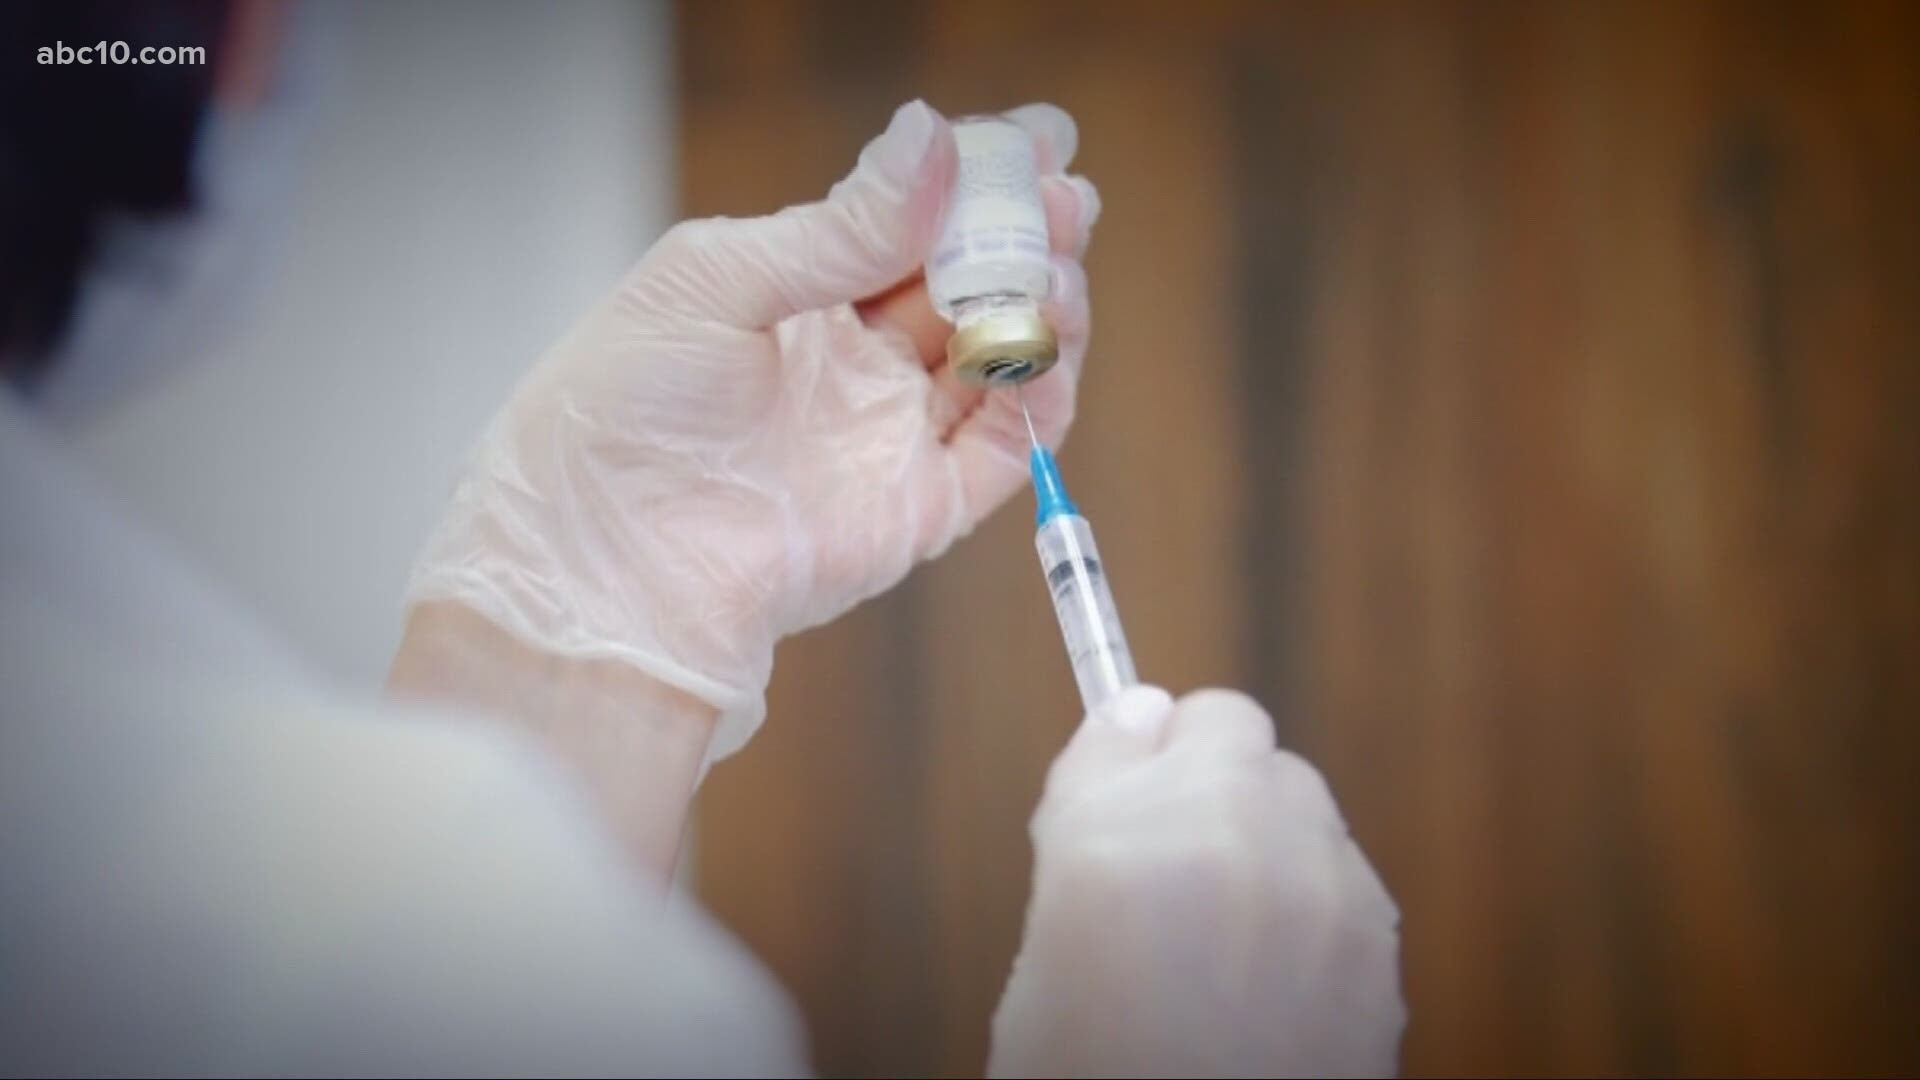 Some 6 million Californians will have to wait another month to get the vaccine, despite being at high risk of serious illness from coronavirus.